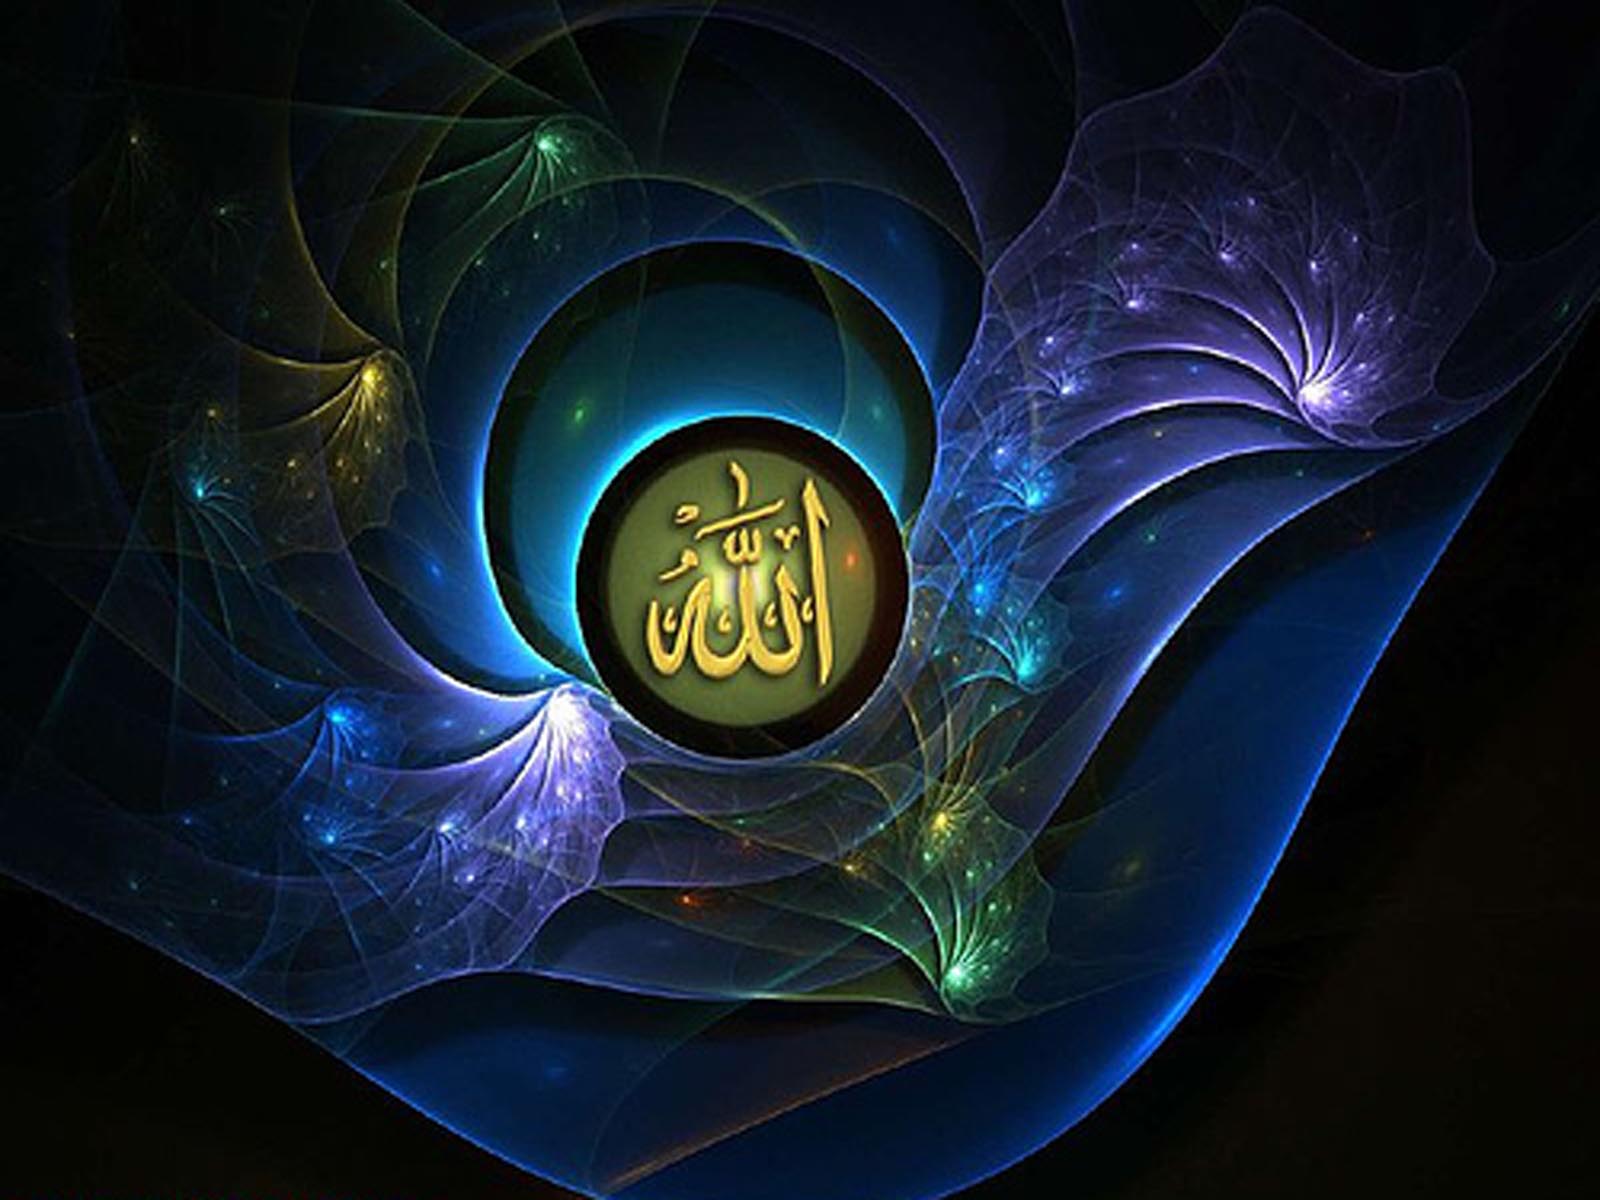 All In One Computer Mobiles Software Keys Islamic HD Wallpapers Download Free Map Images Wallpaper [wallpaper376.blogspot.com]